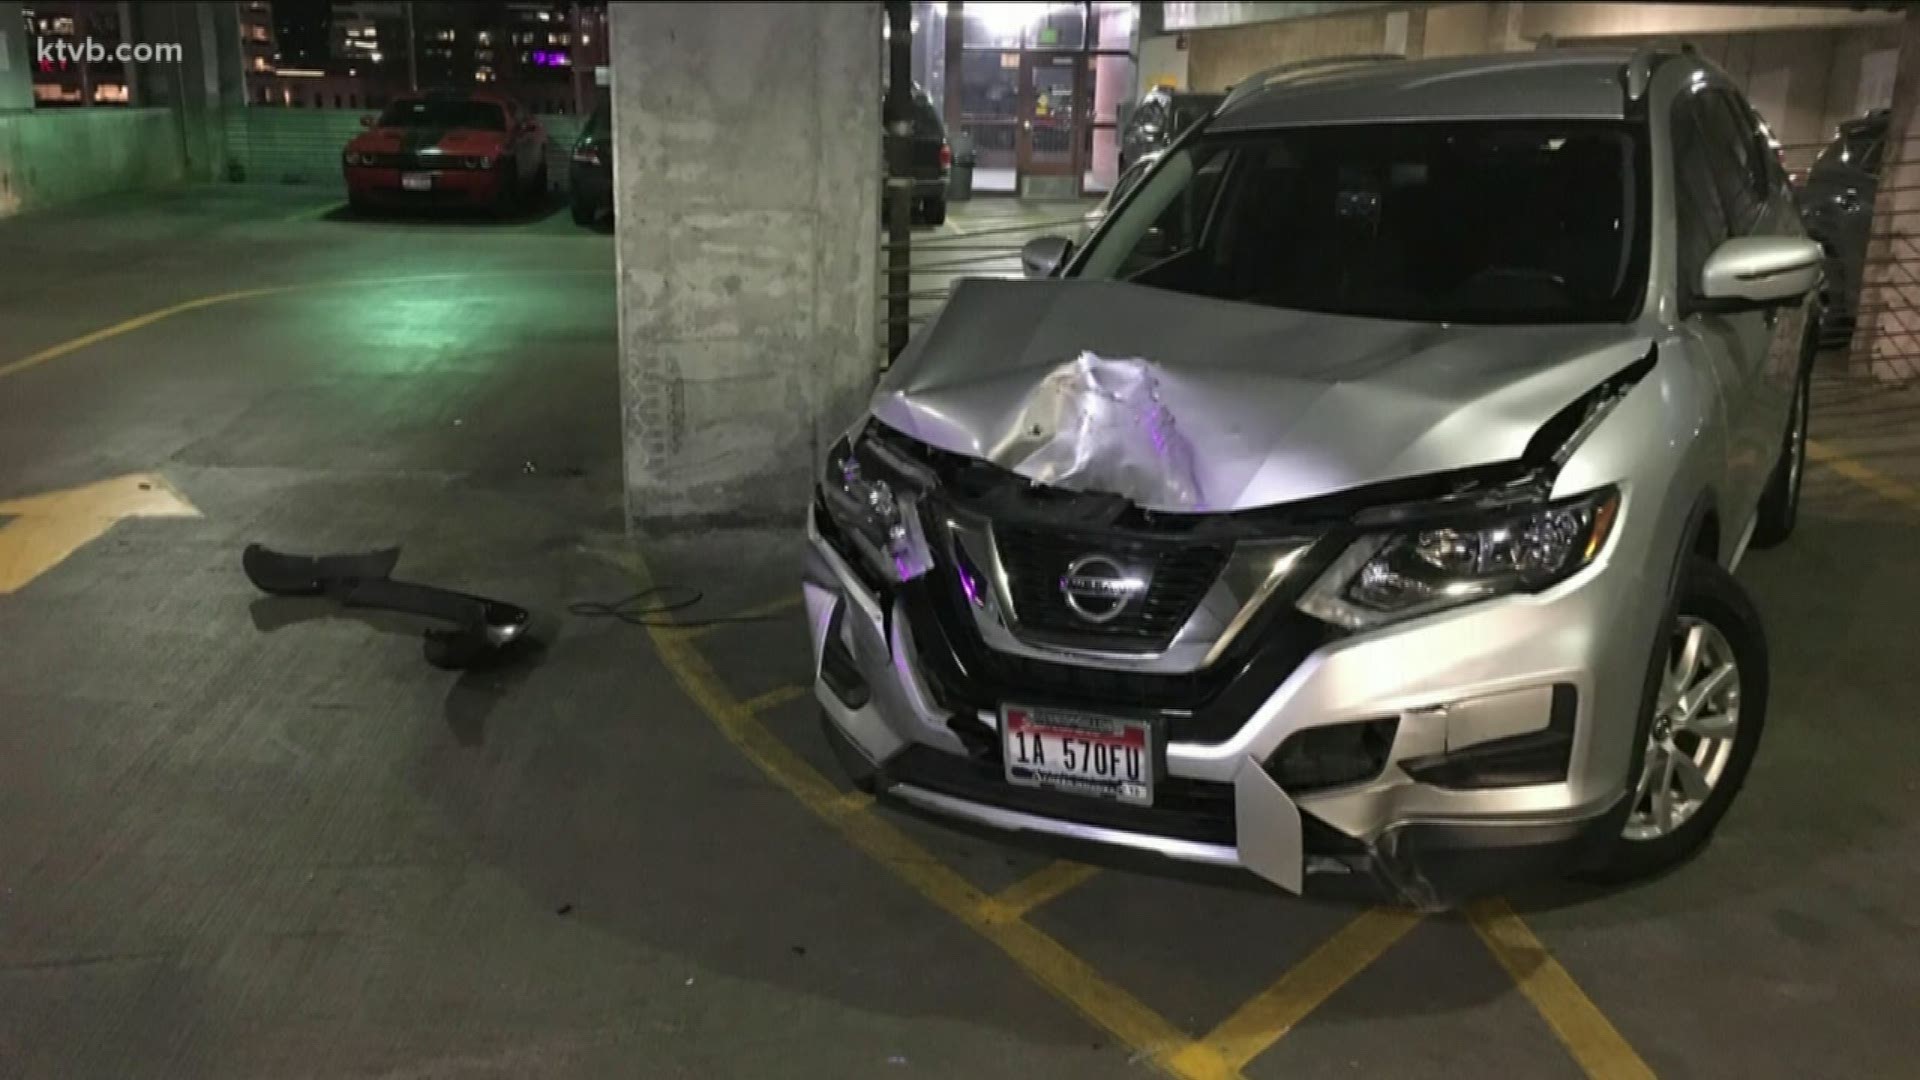 The driver of a yellow Ford Mustang struck 11 vehicles in a downtown Boise parking garage before fleeing the scene on Friday night.